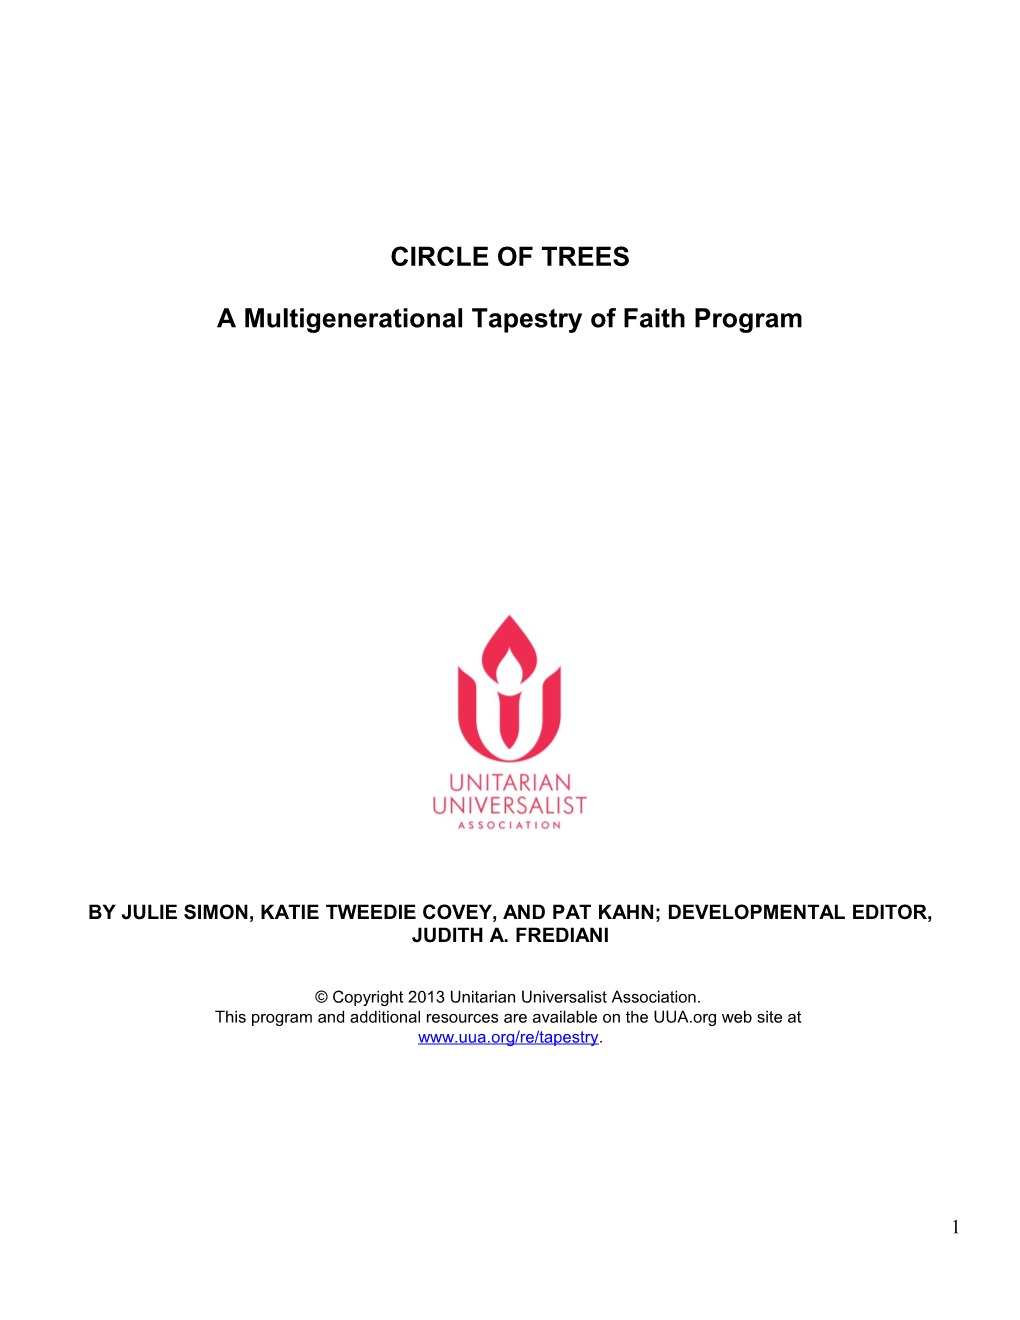 CIRCLE of TREES a Multigenerational Tapestry of Faith Program